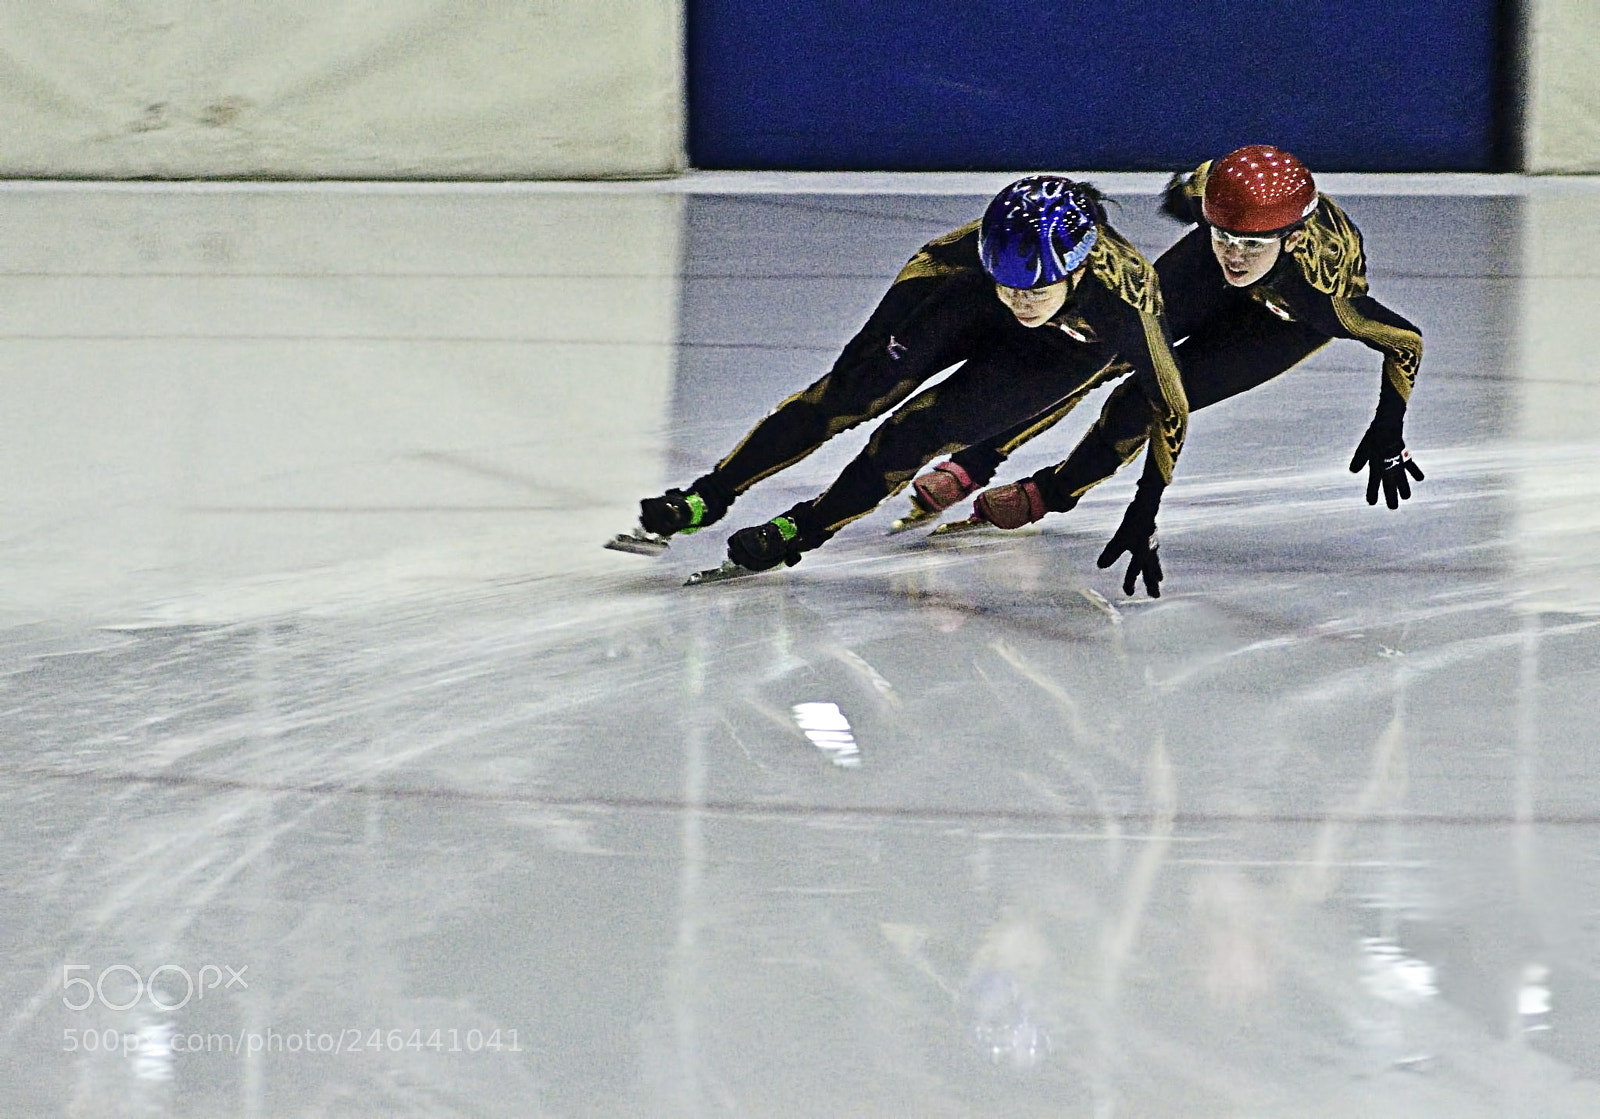 Sony Alpha DSLR-A700 sample photo. Olympic speed skaters photography